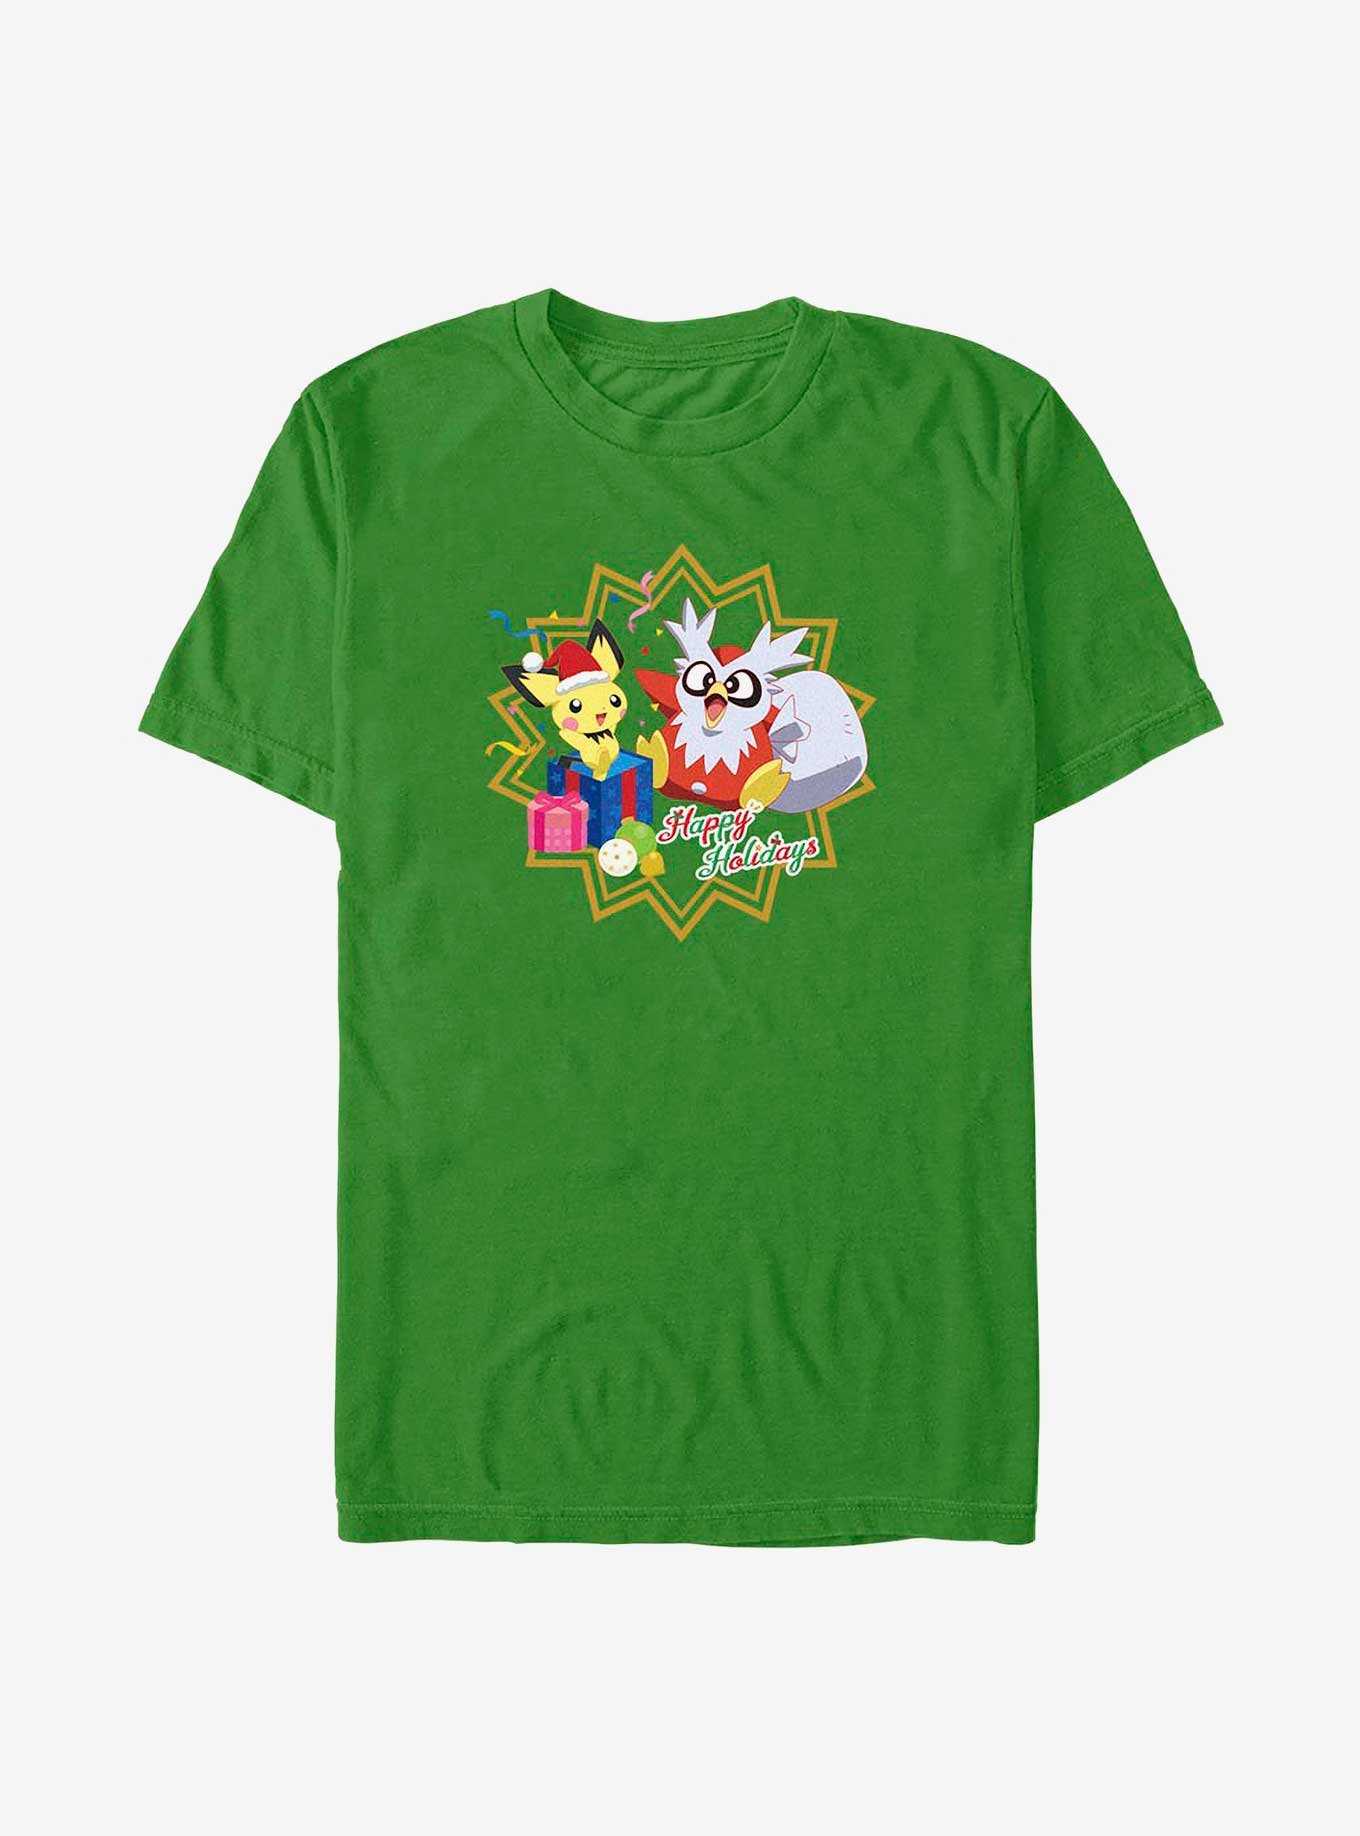 Pokemon Pichu and Delibird Holiday Party T-Shirt, , hi-res